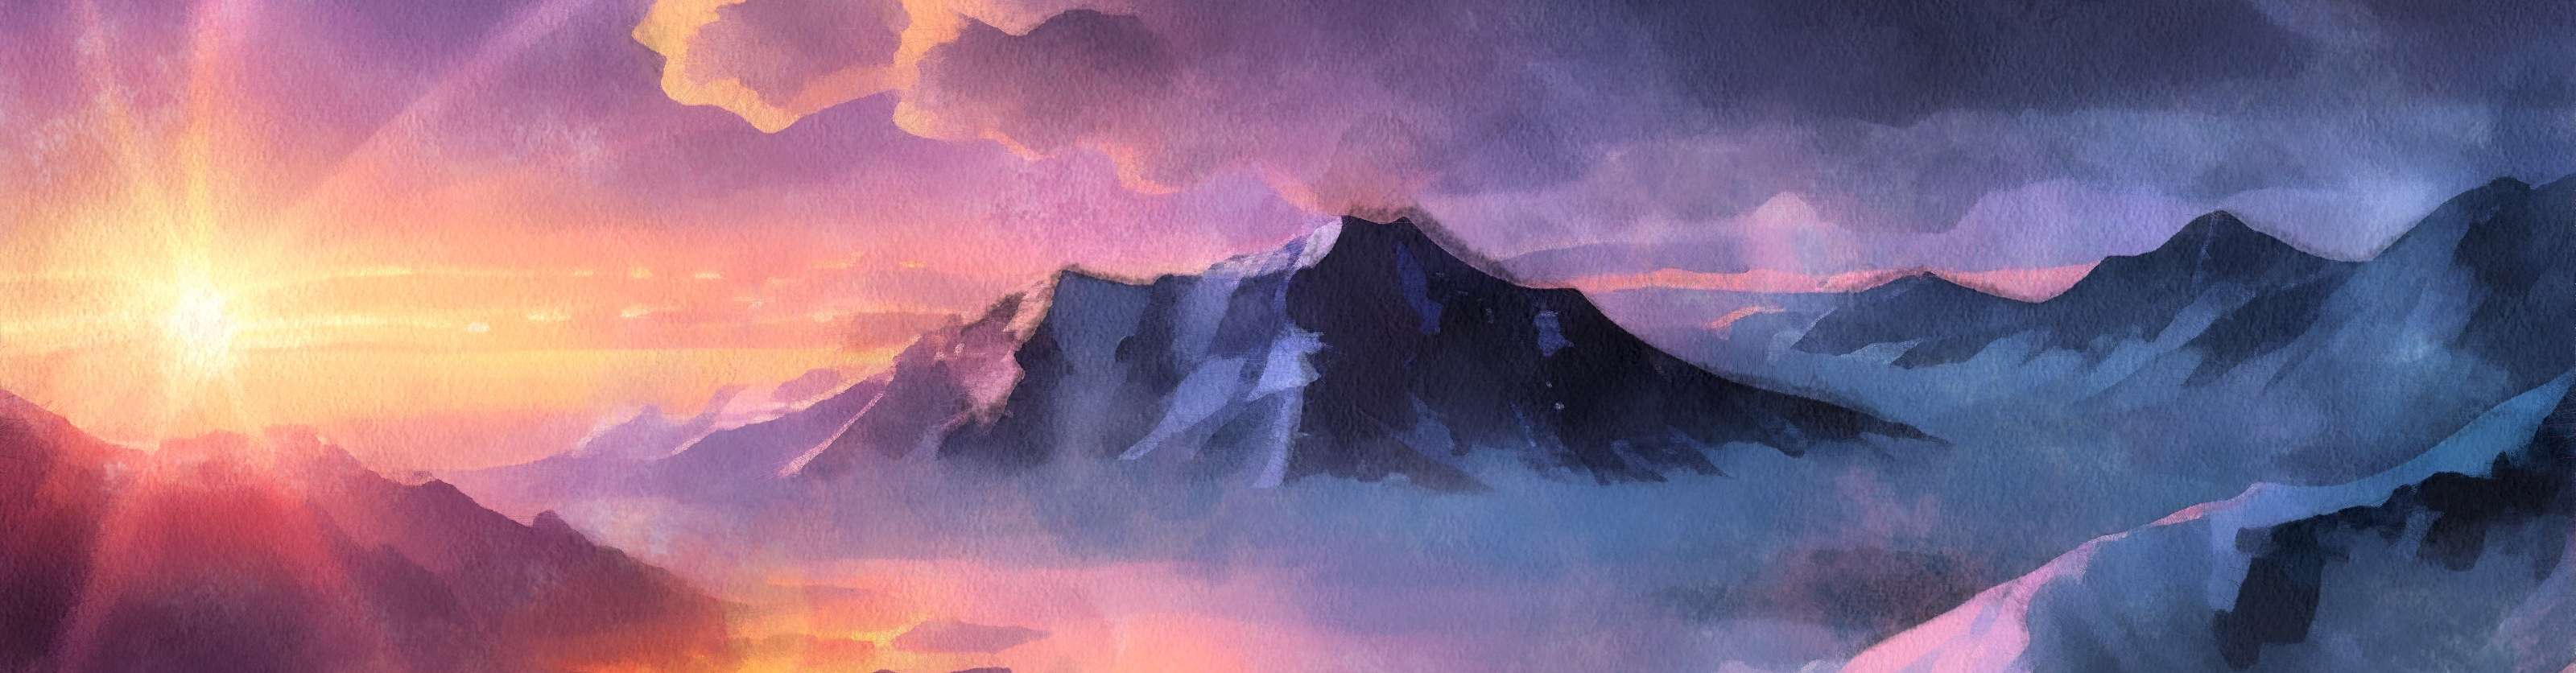 32 Free Digital Watercolor Paintings of Desolate Landscapes